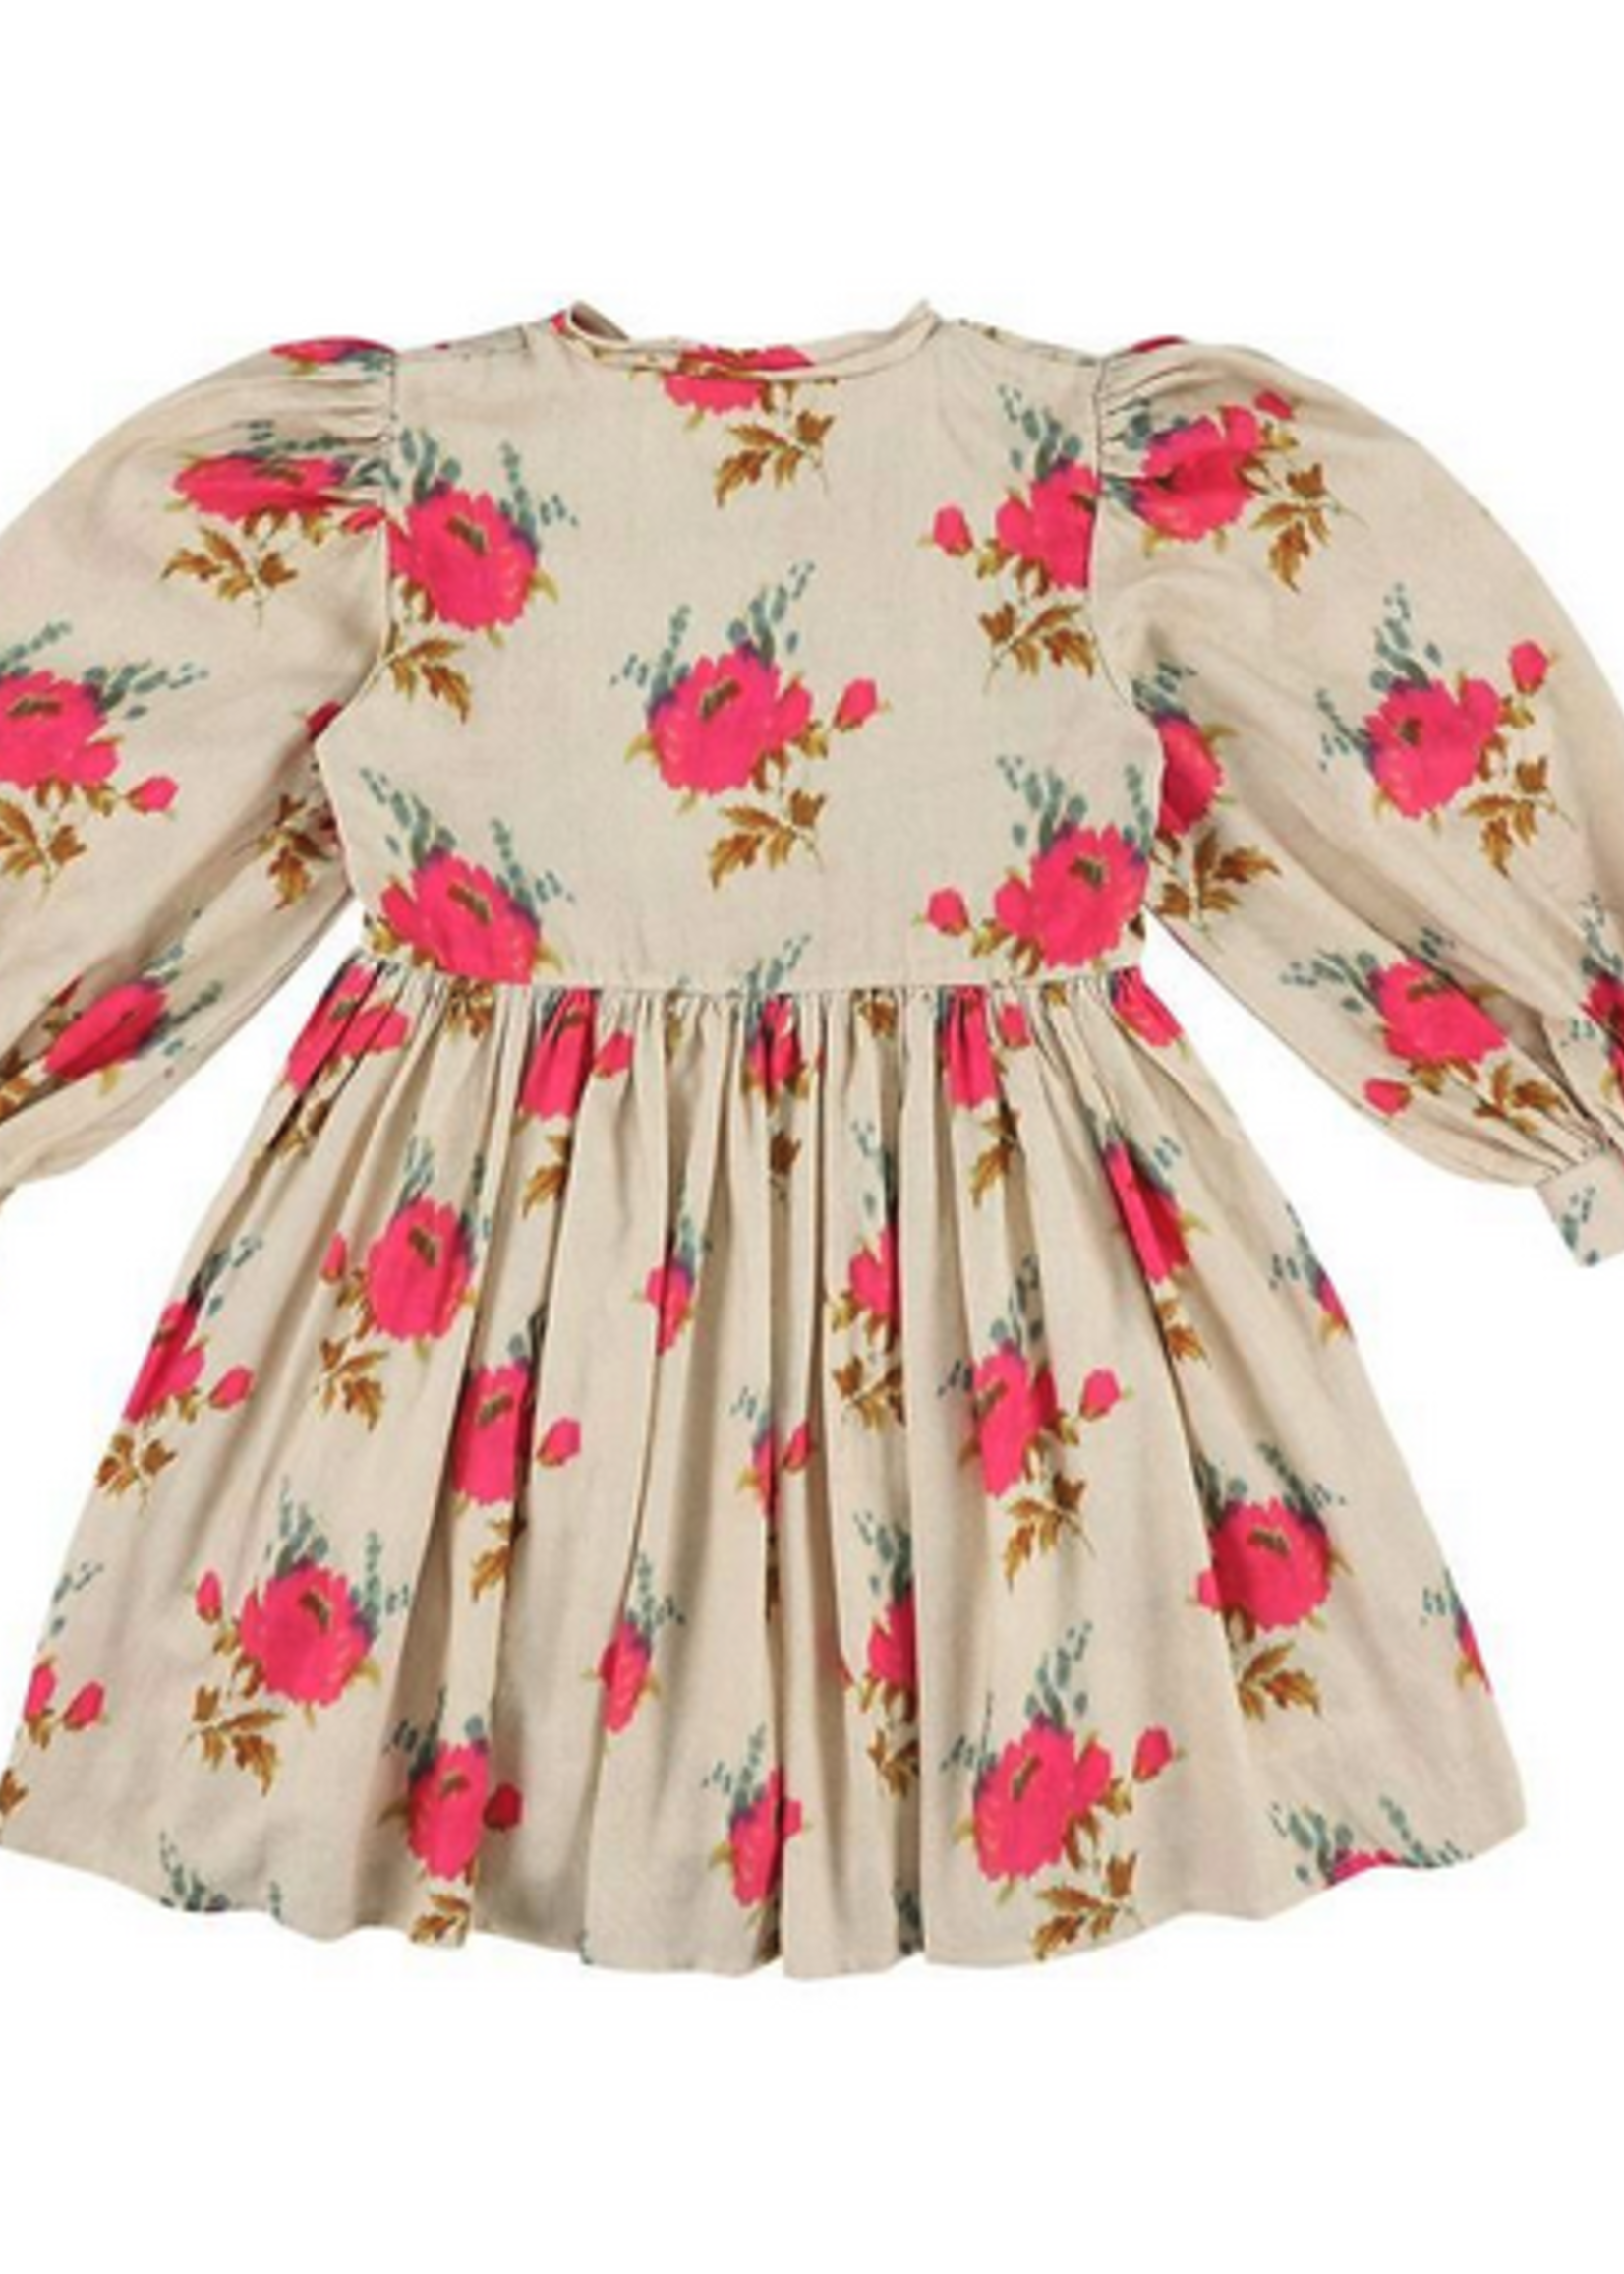 MORLEY TRUDY ROSES DRESS